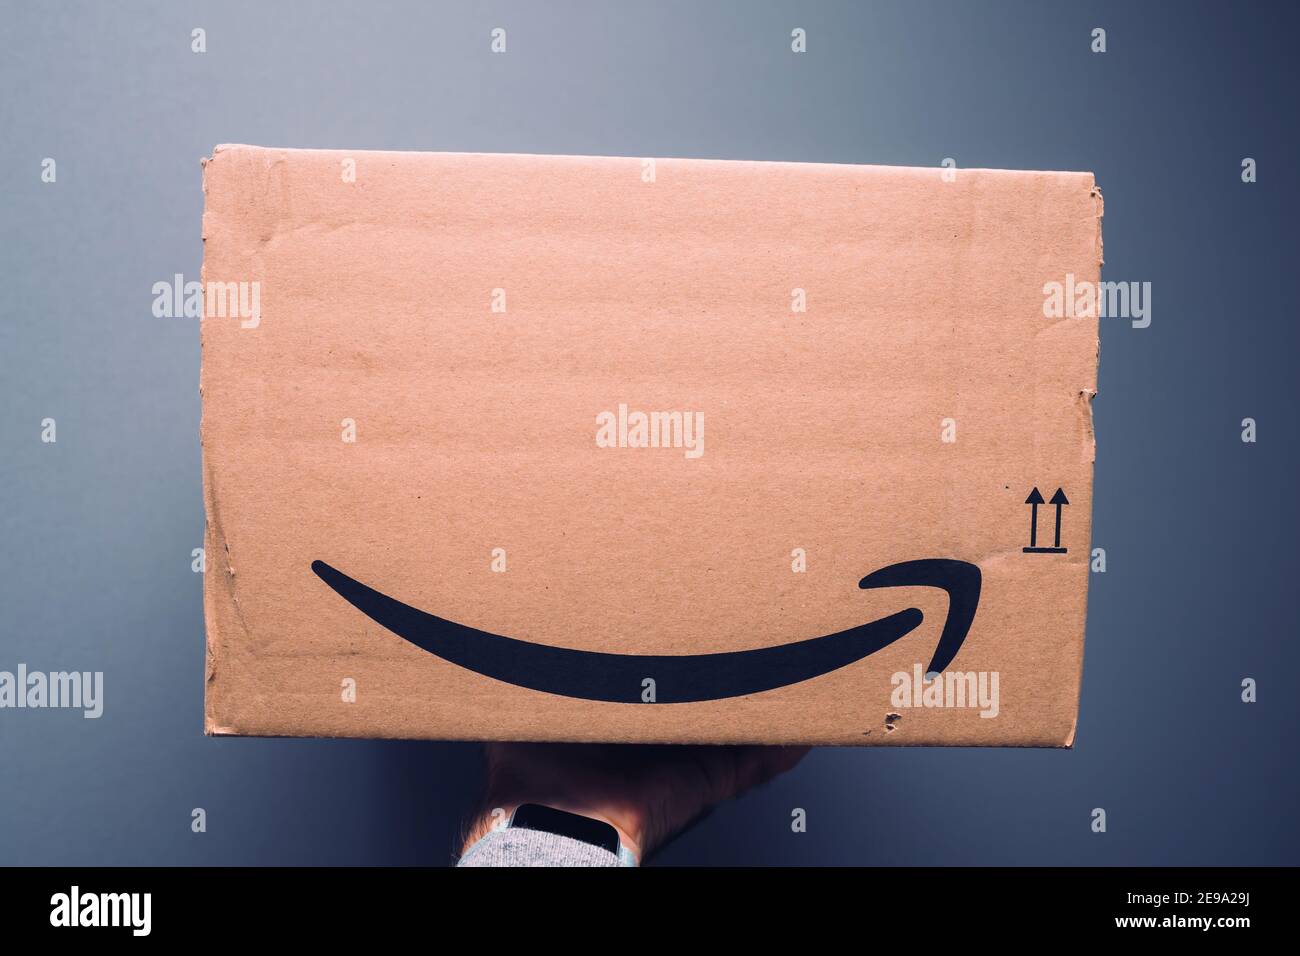 Paris, France - Oct 29, 2018: POV male hand holding new package of Amazon prime cardboard parcel delivered with the iconic smile-arrow symbol Stock Photo